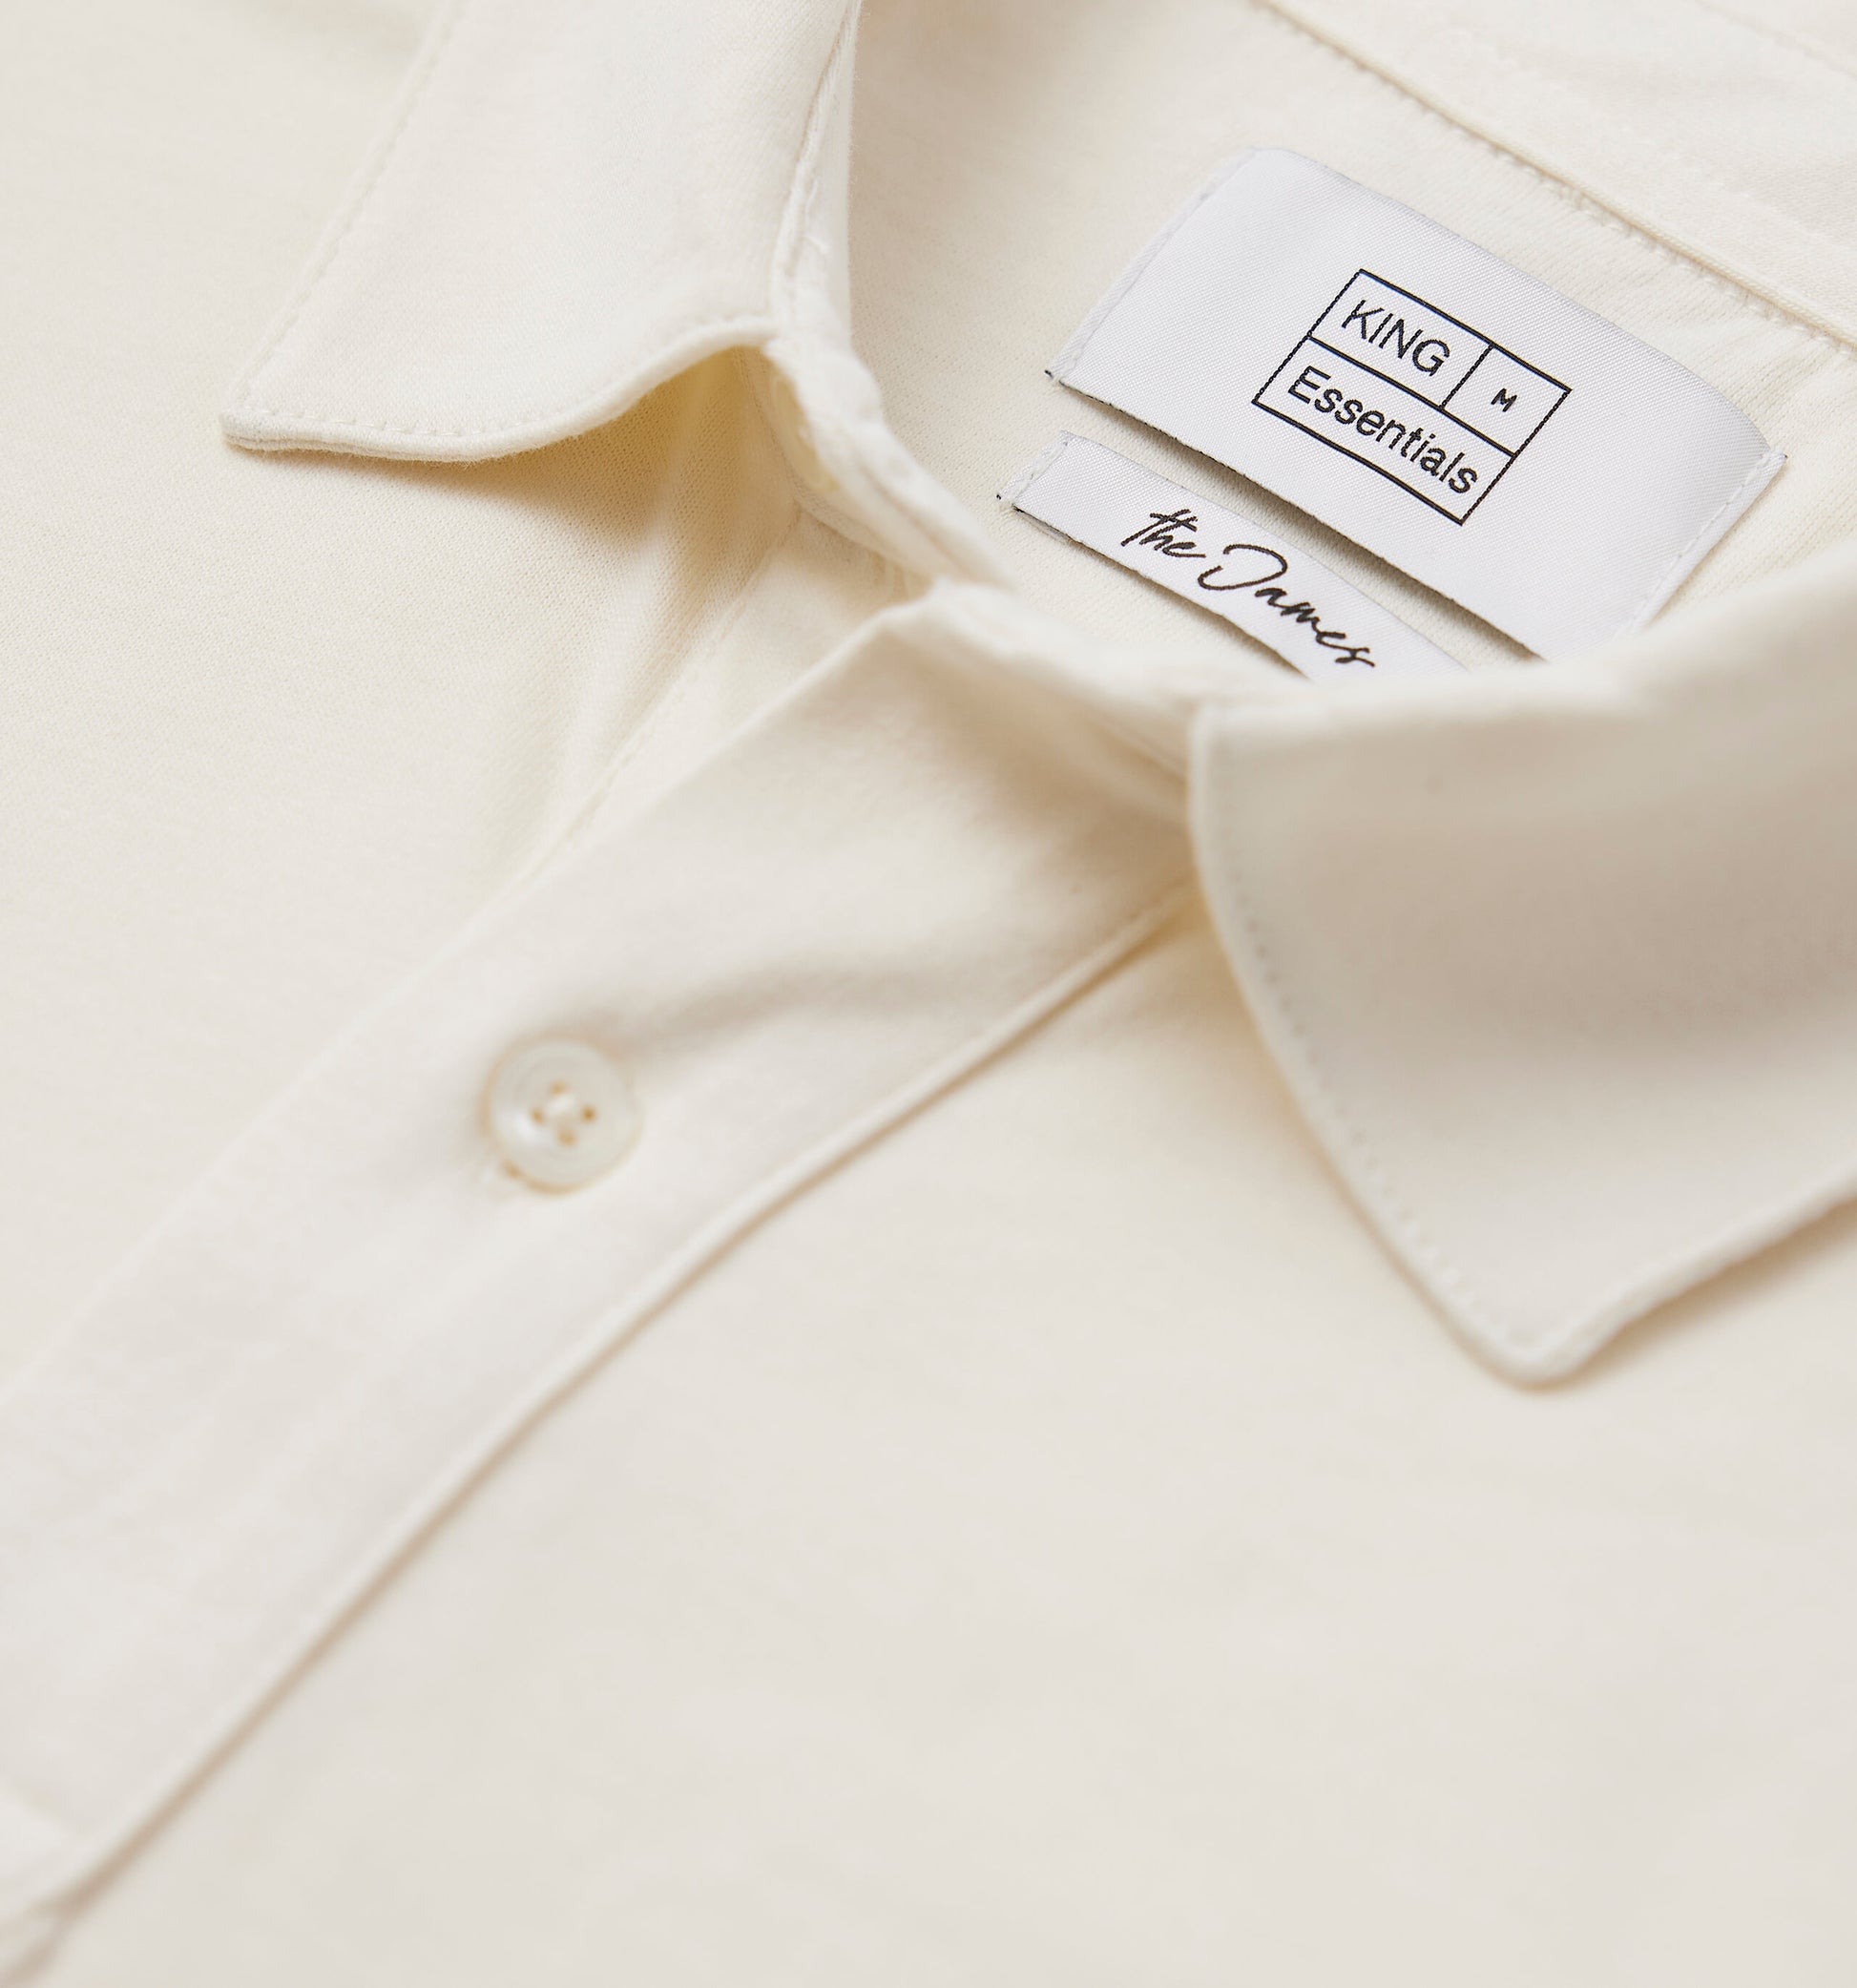 The James - Jersey Cotton Polo In Beige From King Essentials